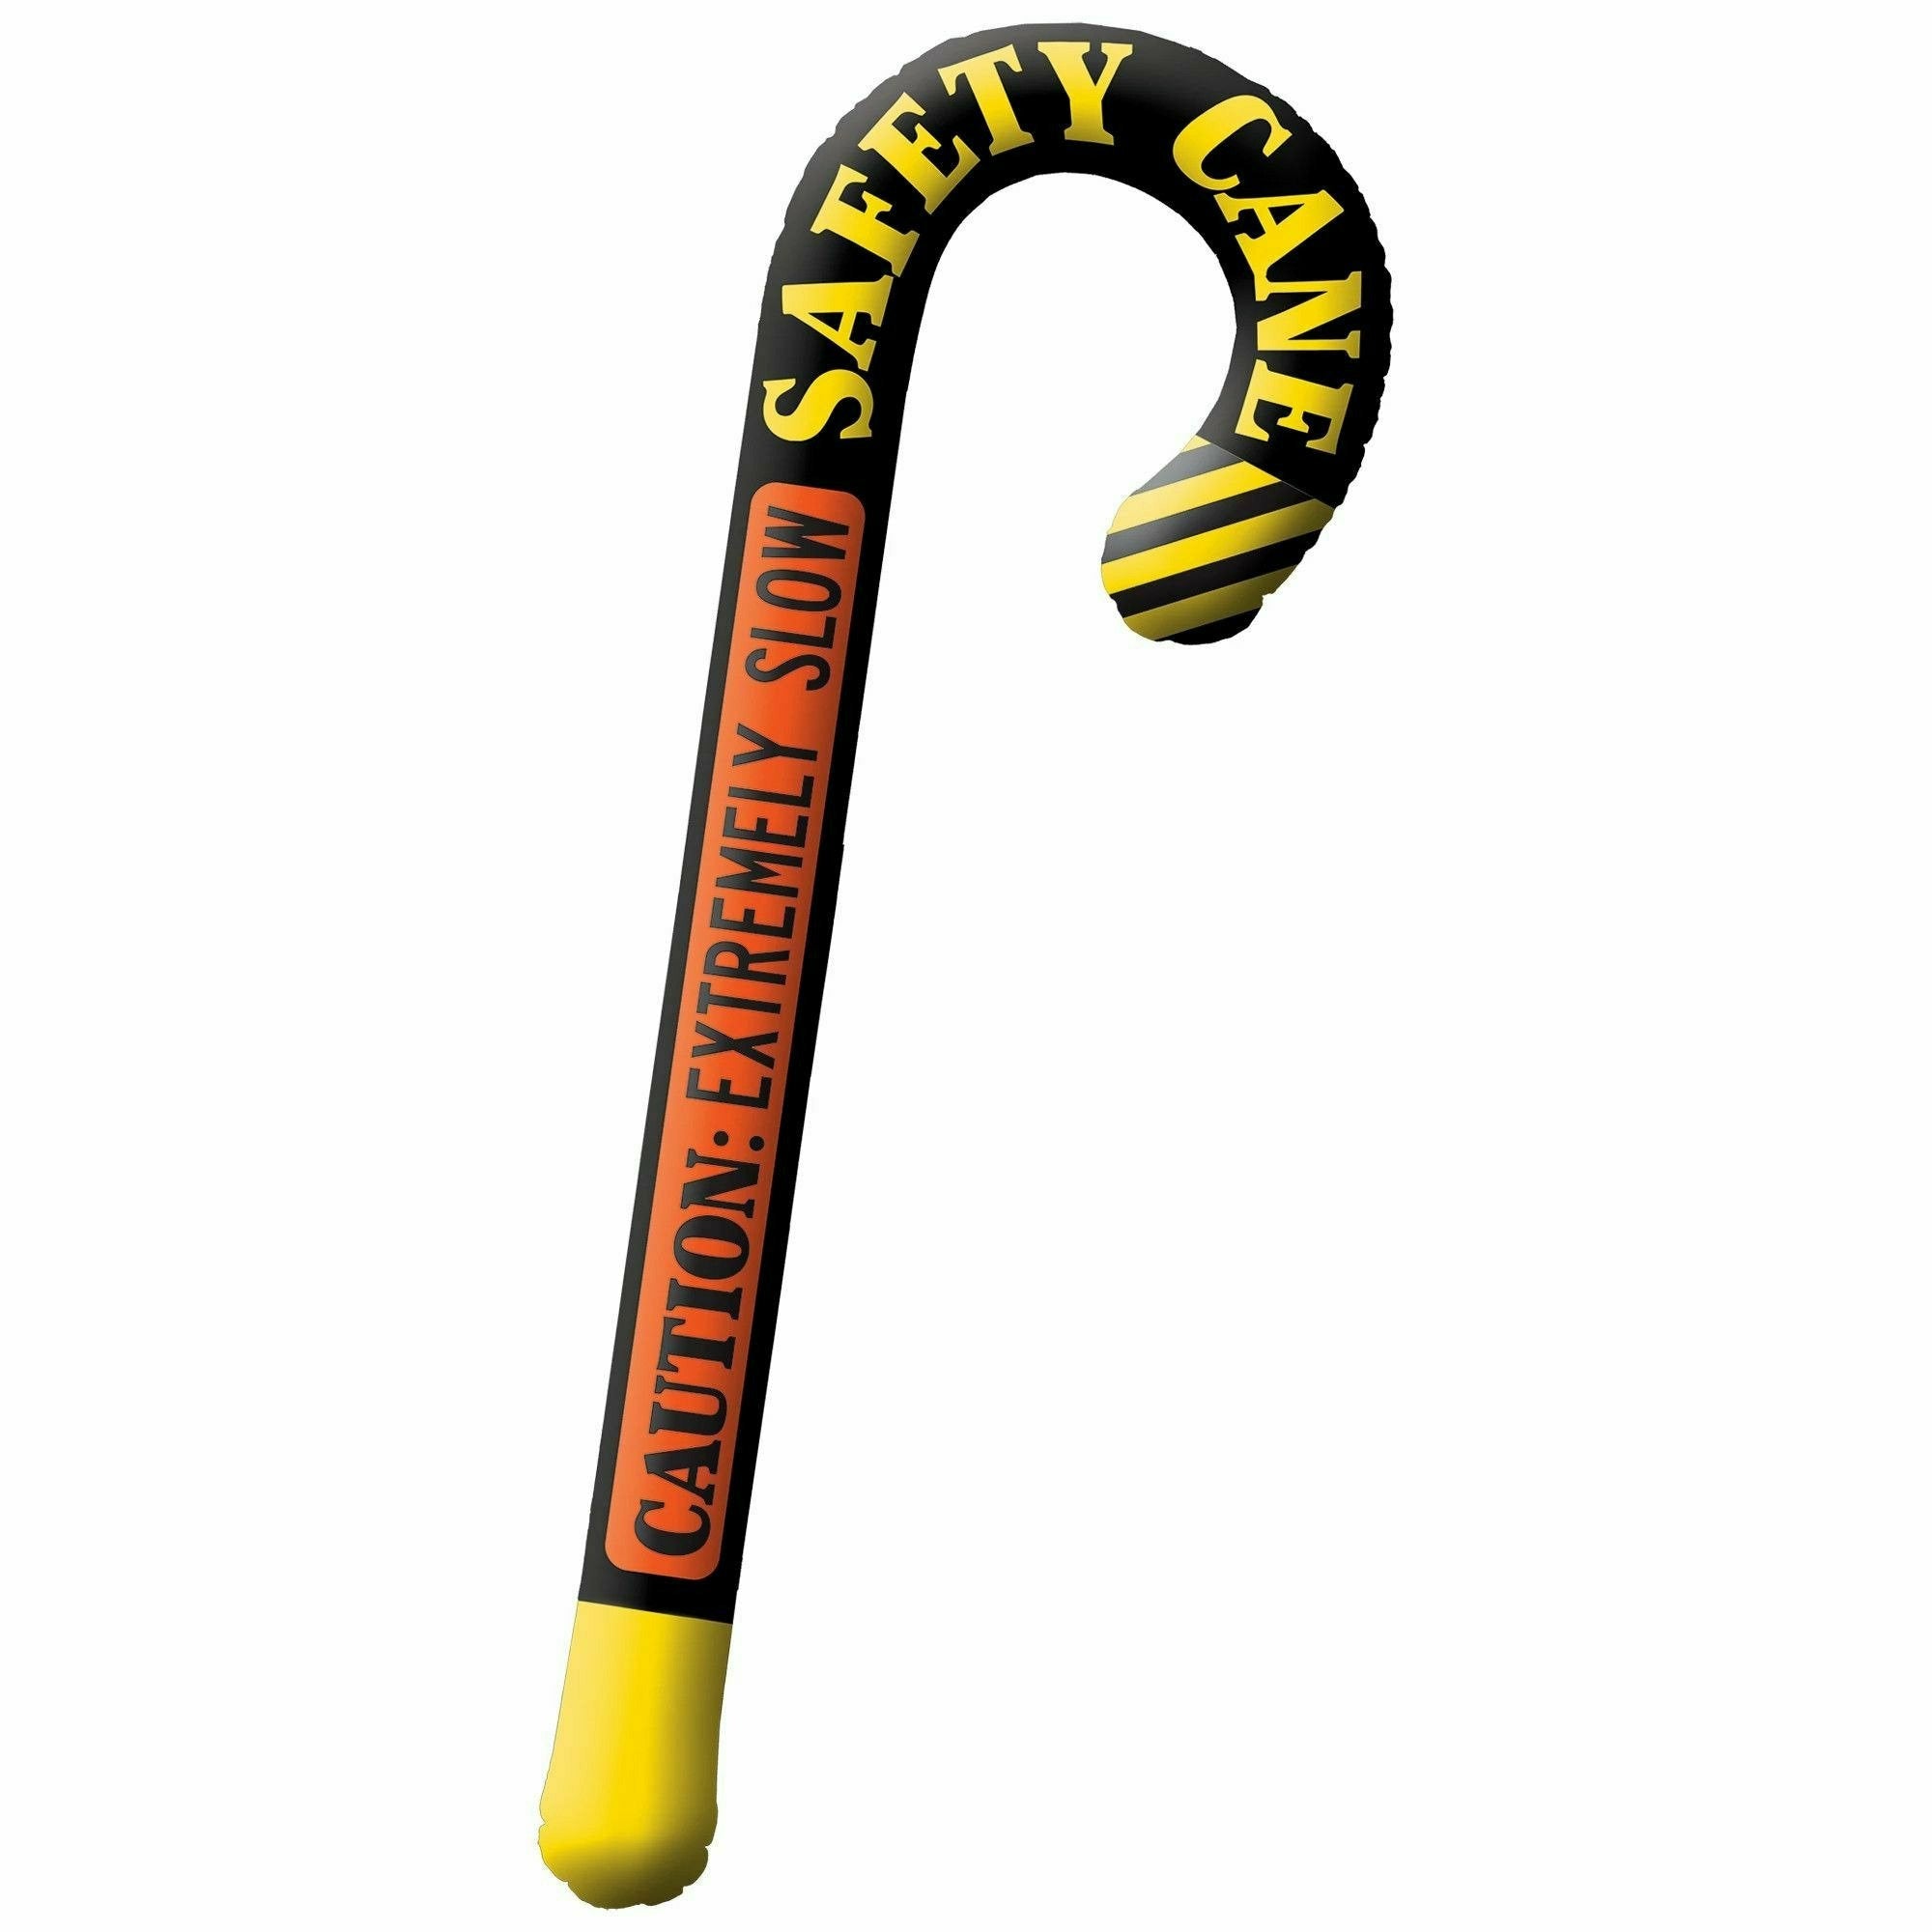 Amscan BIRTHDAY: OVER THE HILL Inflatable Cane Prop